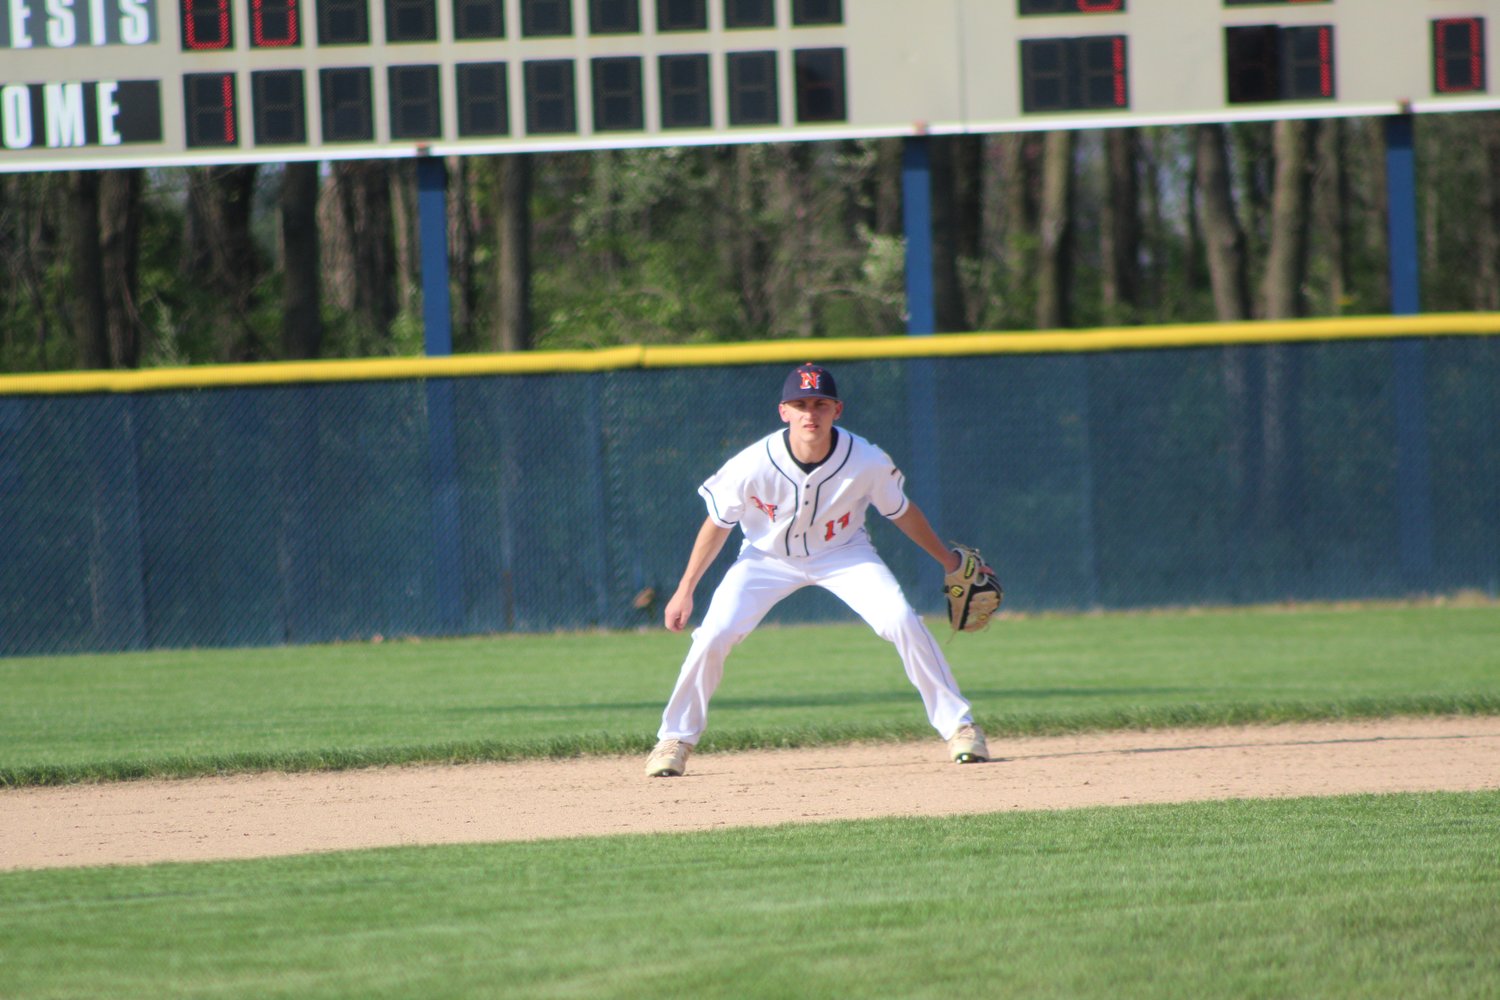 Jakob Kirsch tallied three hits and scored a pair of runs for the Chargers.